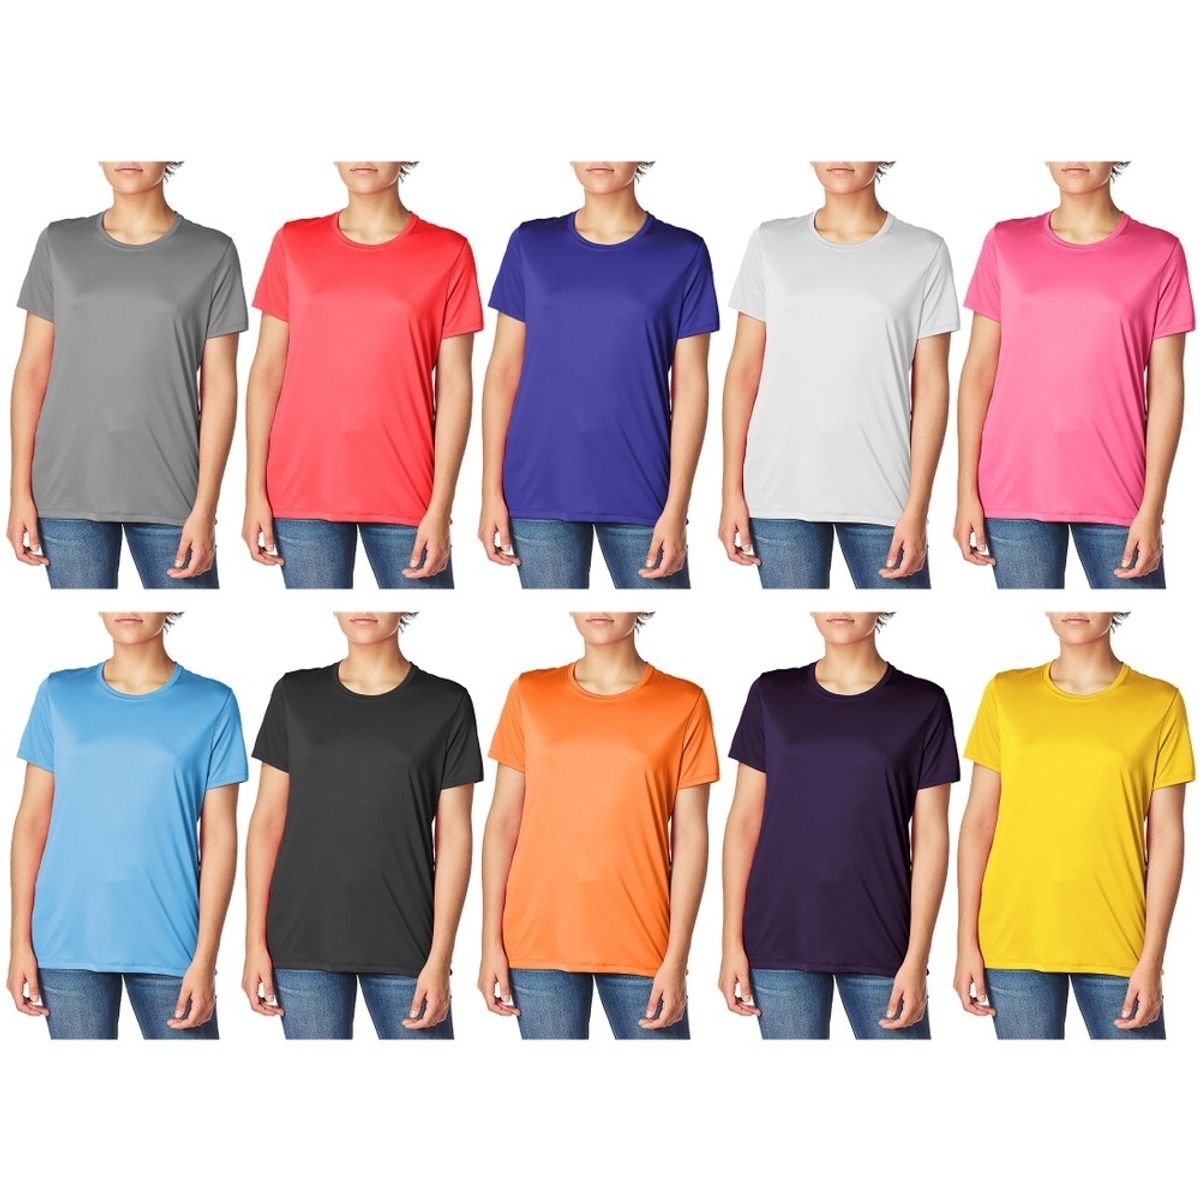 5-Pack: Women's Cool Dri-FIt Moisture Wicking Sim-Fit Long Sleeve Crew Neck T-Shirts - Small